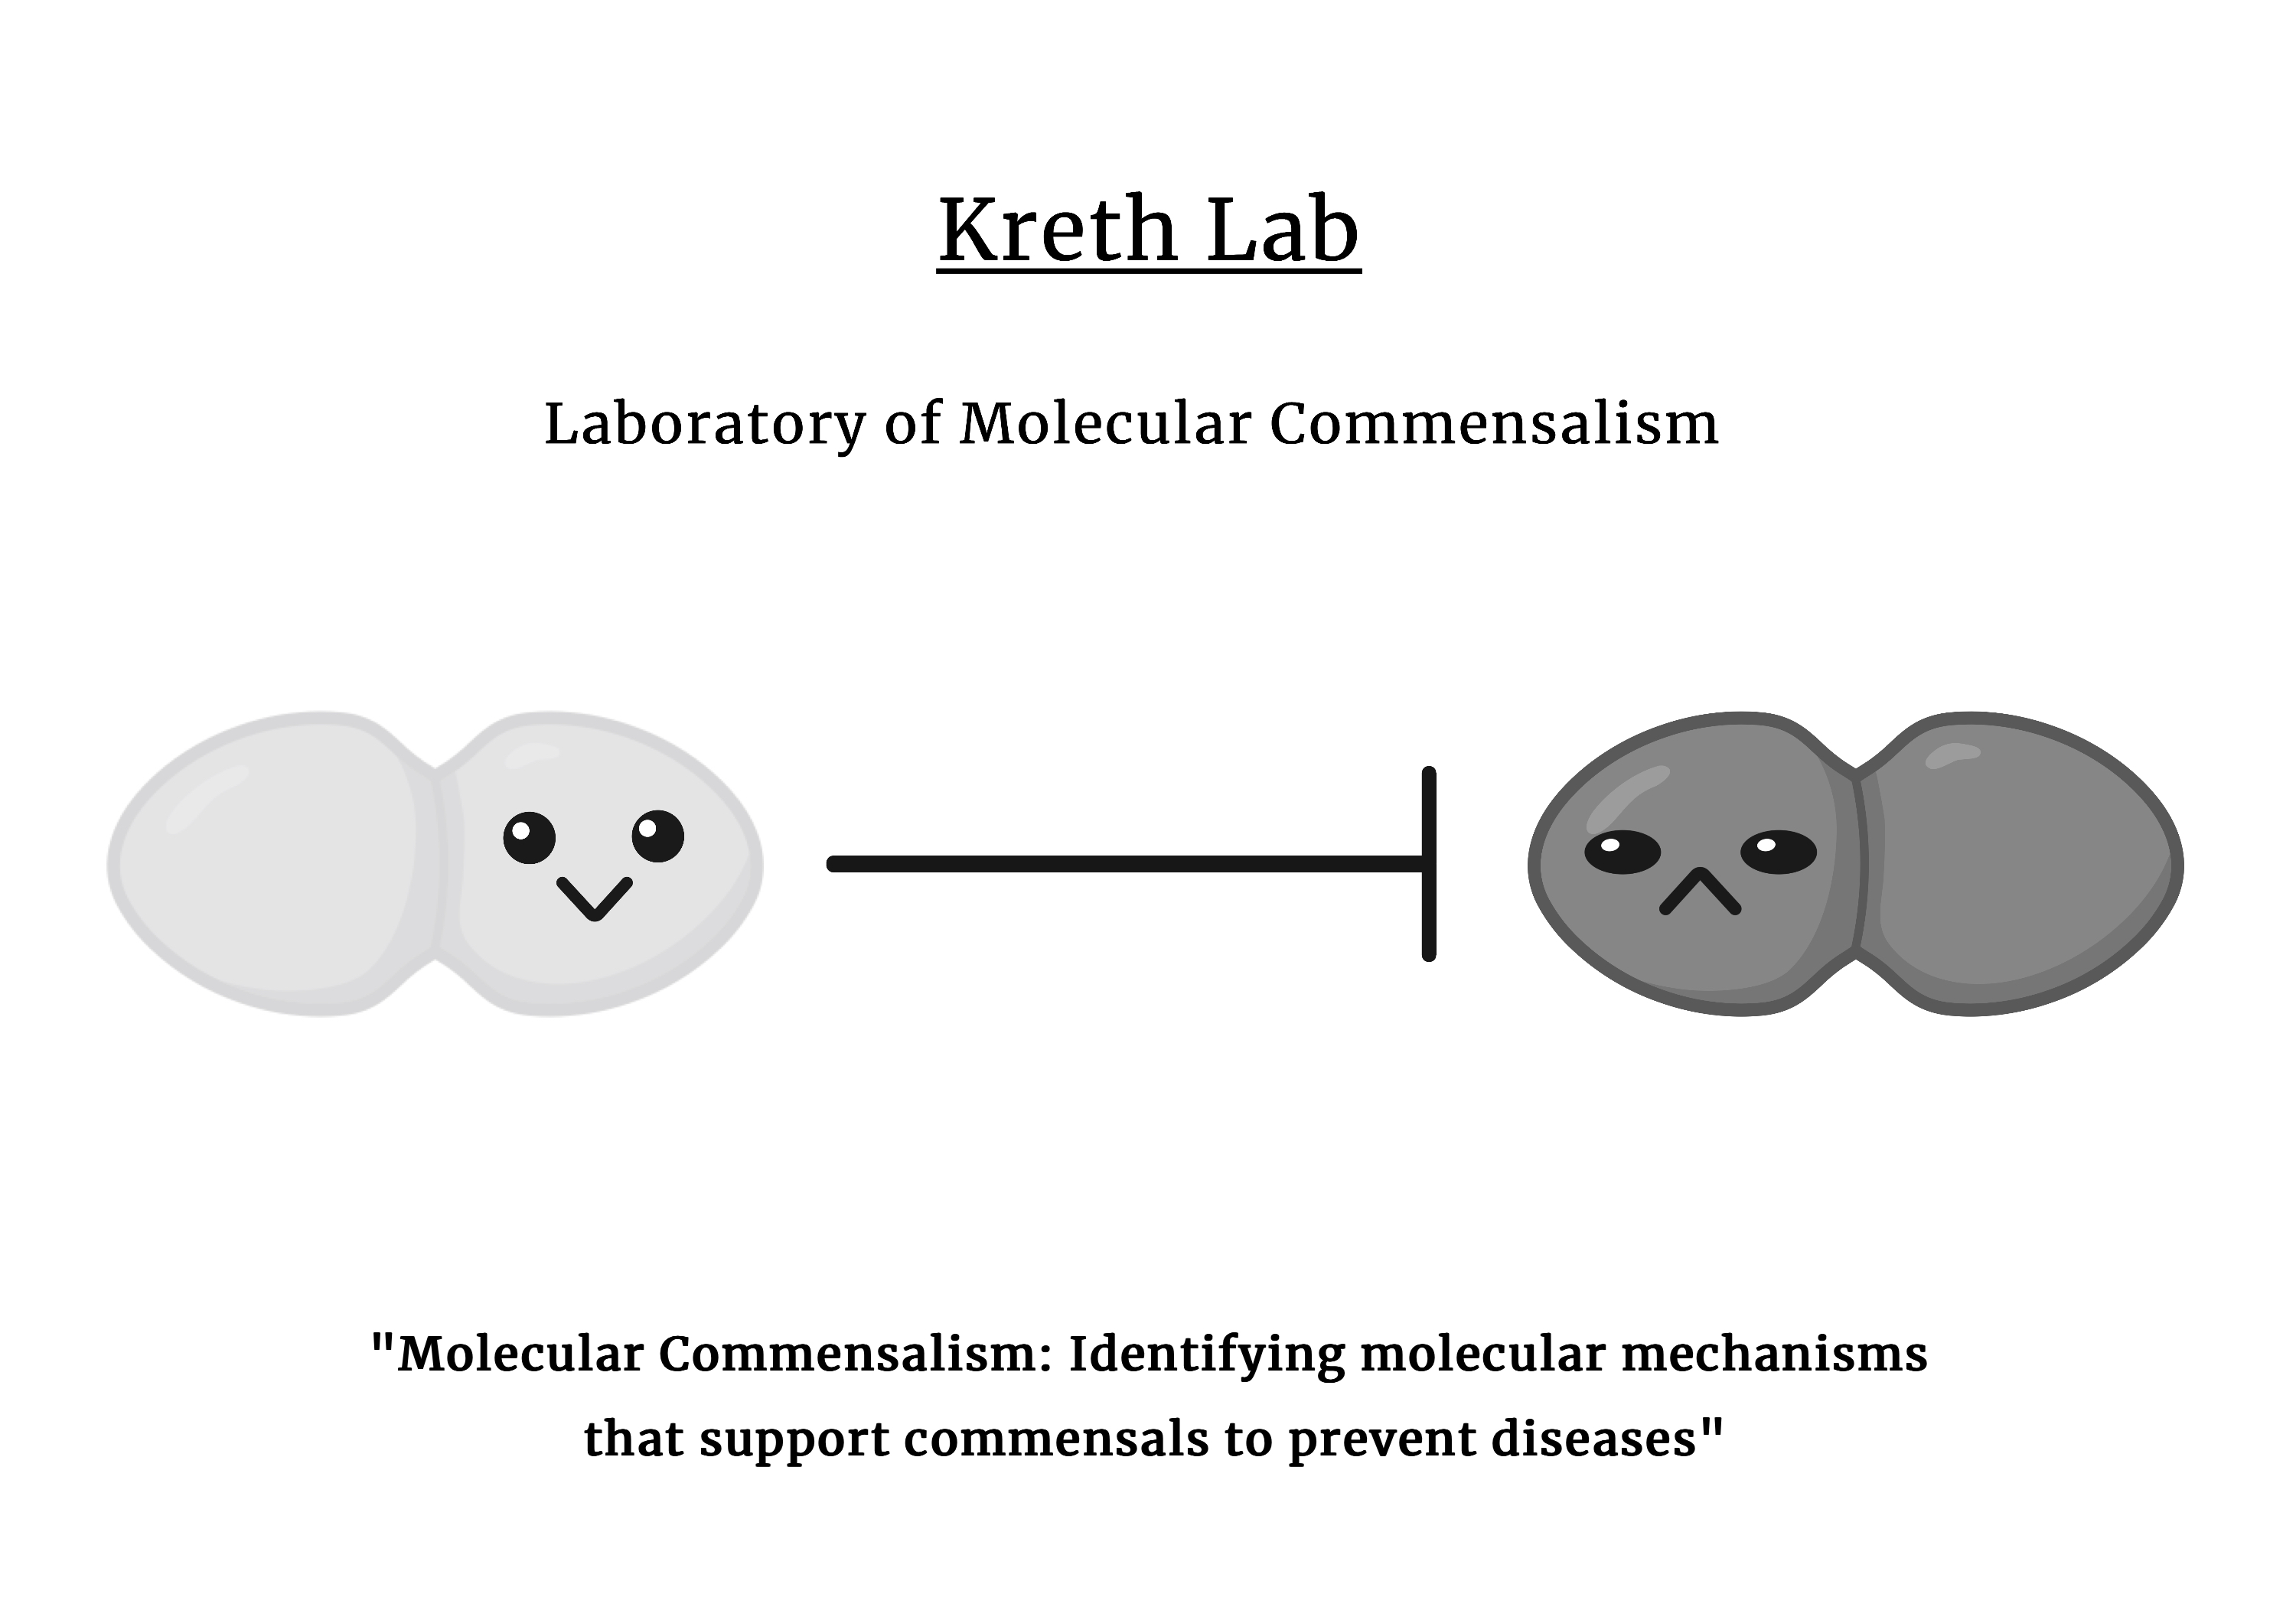 Simple graphic showing Molecular Commensalism. Identifying molecular mechanisms that support commensals to prevent diseases.